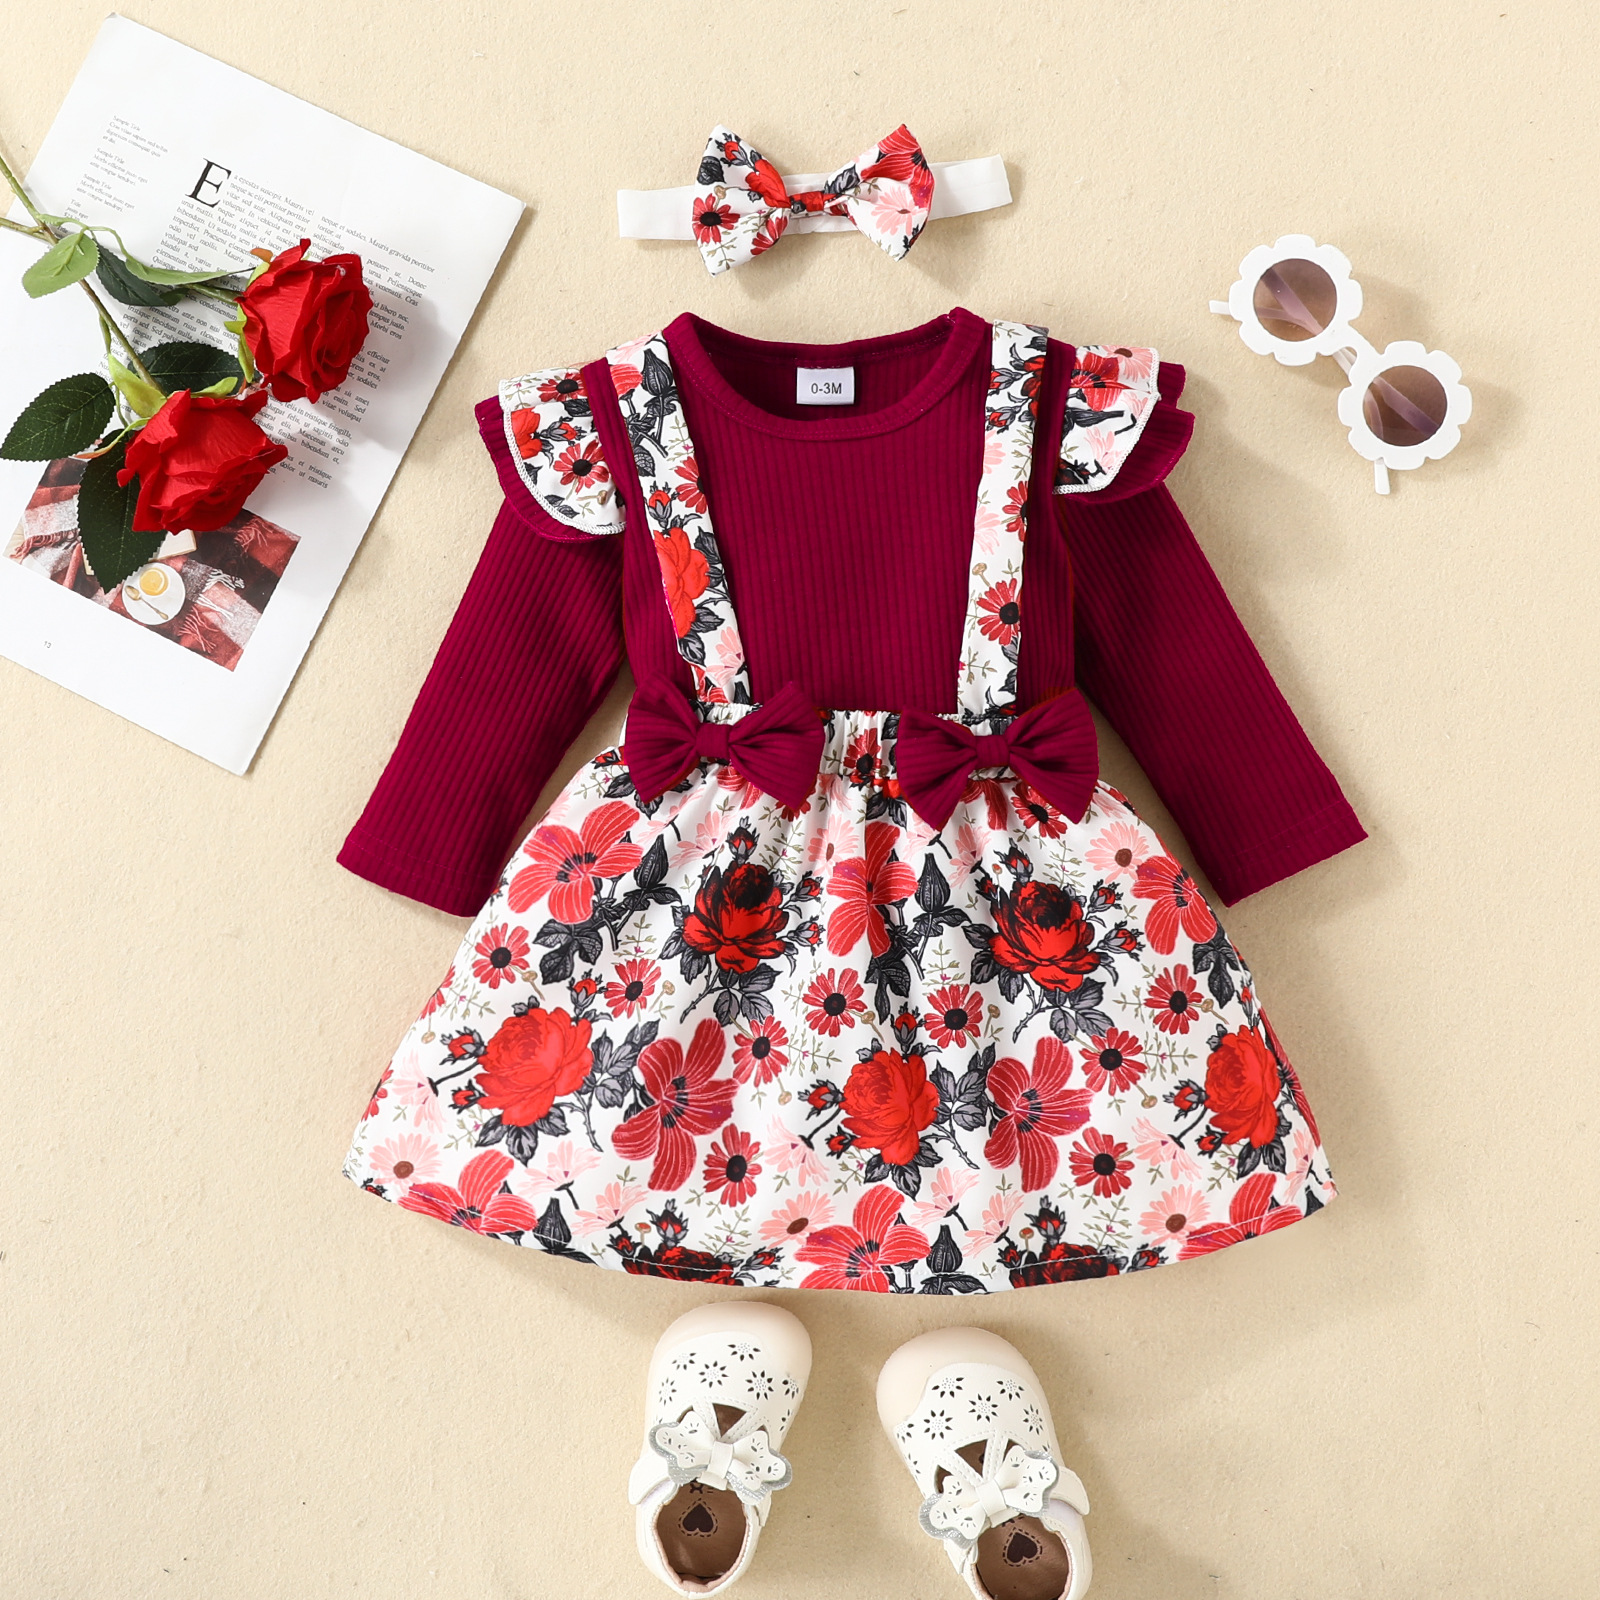 Flower Printed Skirt and Maroon Romper Set with Headband